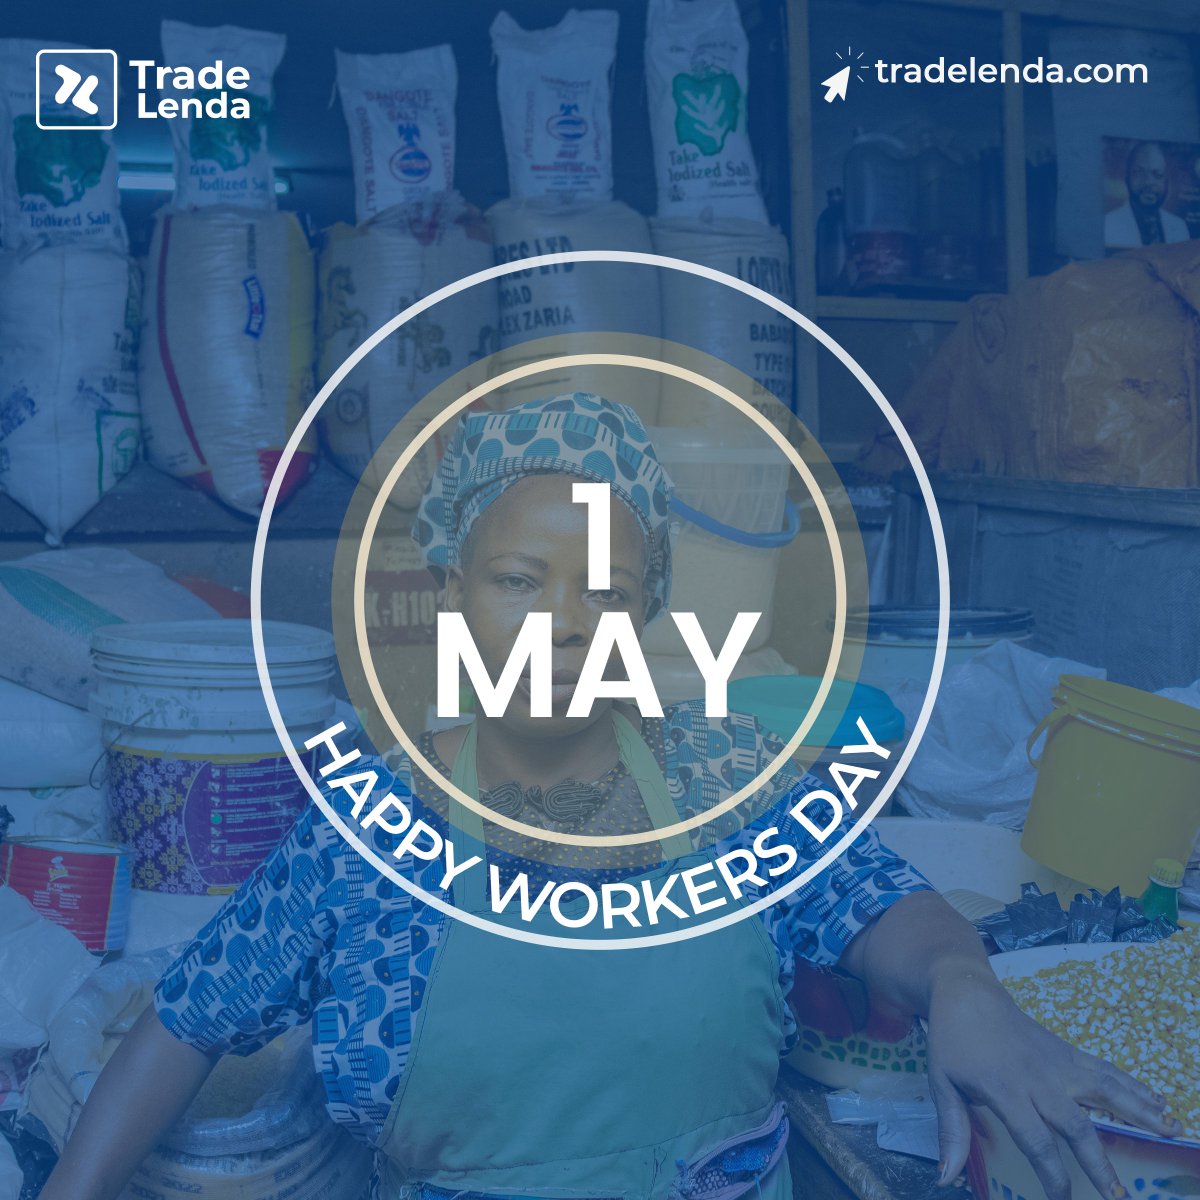 Happy Workers' Day from the Trade Lenda family! As champions of small and medium enterprises (SMEs), we're committed to revolutionizing banking through digital innovation. #WorkersDay #SMEEmpowerment #DigitalBanking